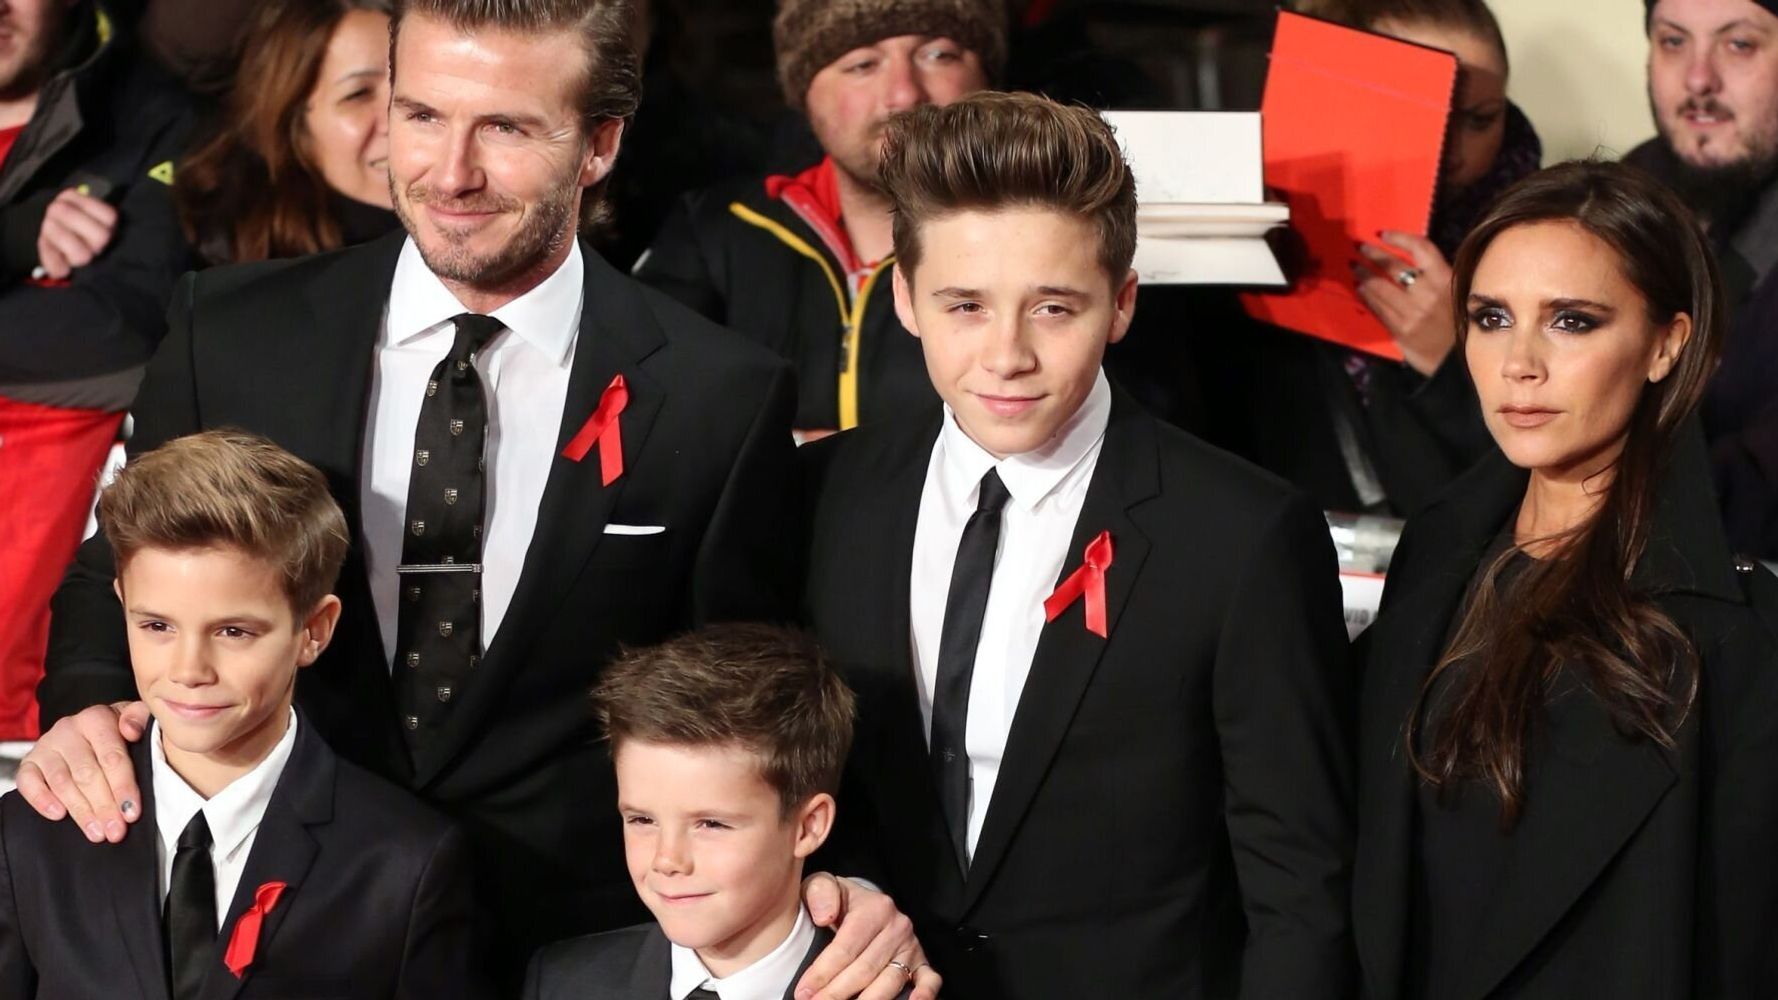 Beckhams Voted The Most 'Modern Family' - Do You Agree? | HuffPost UK ...